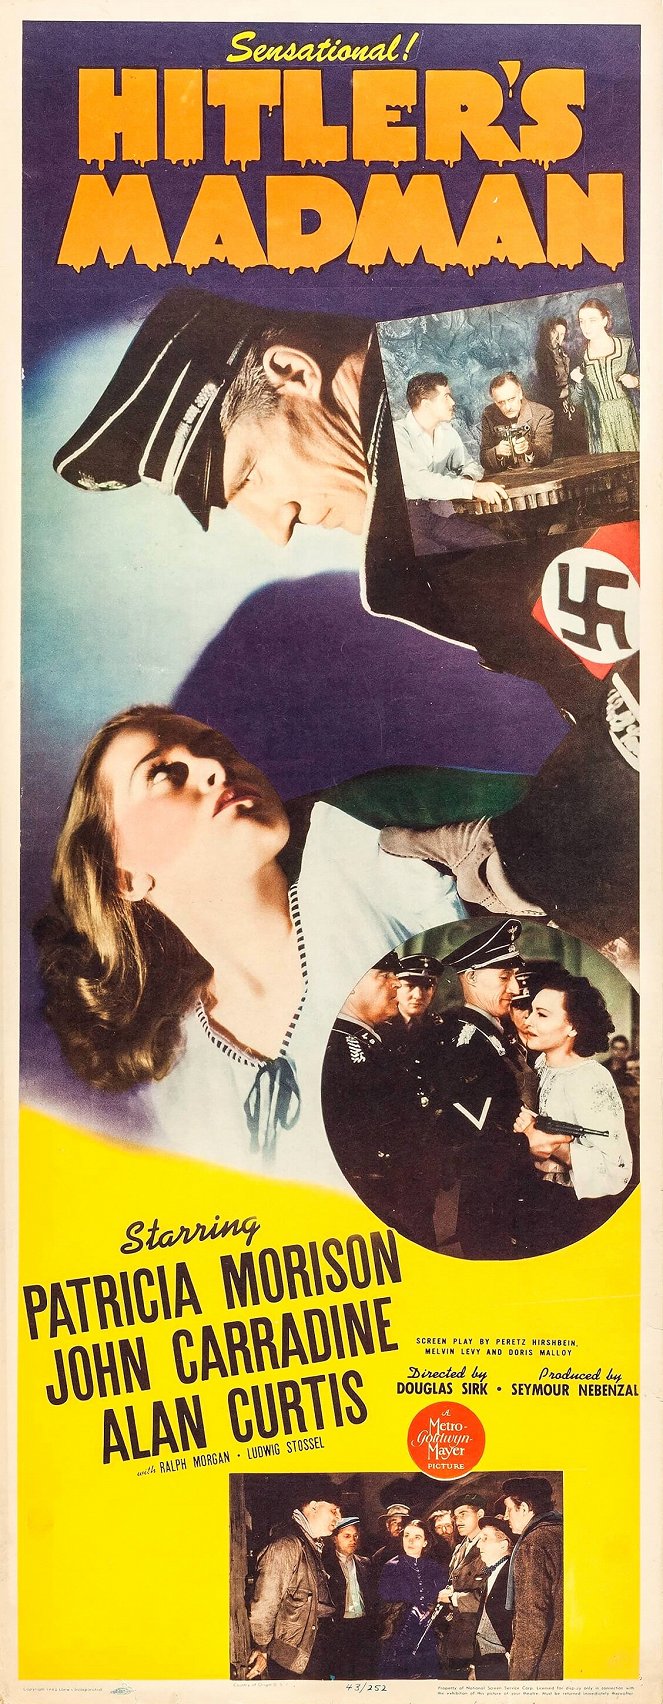 Hitler's Madman - Posters